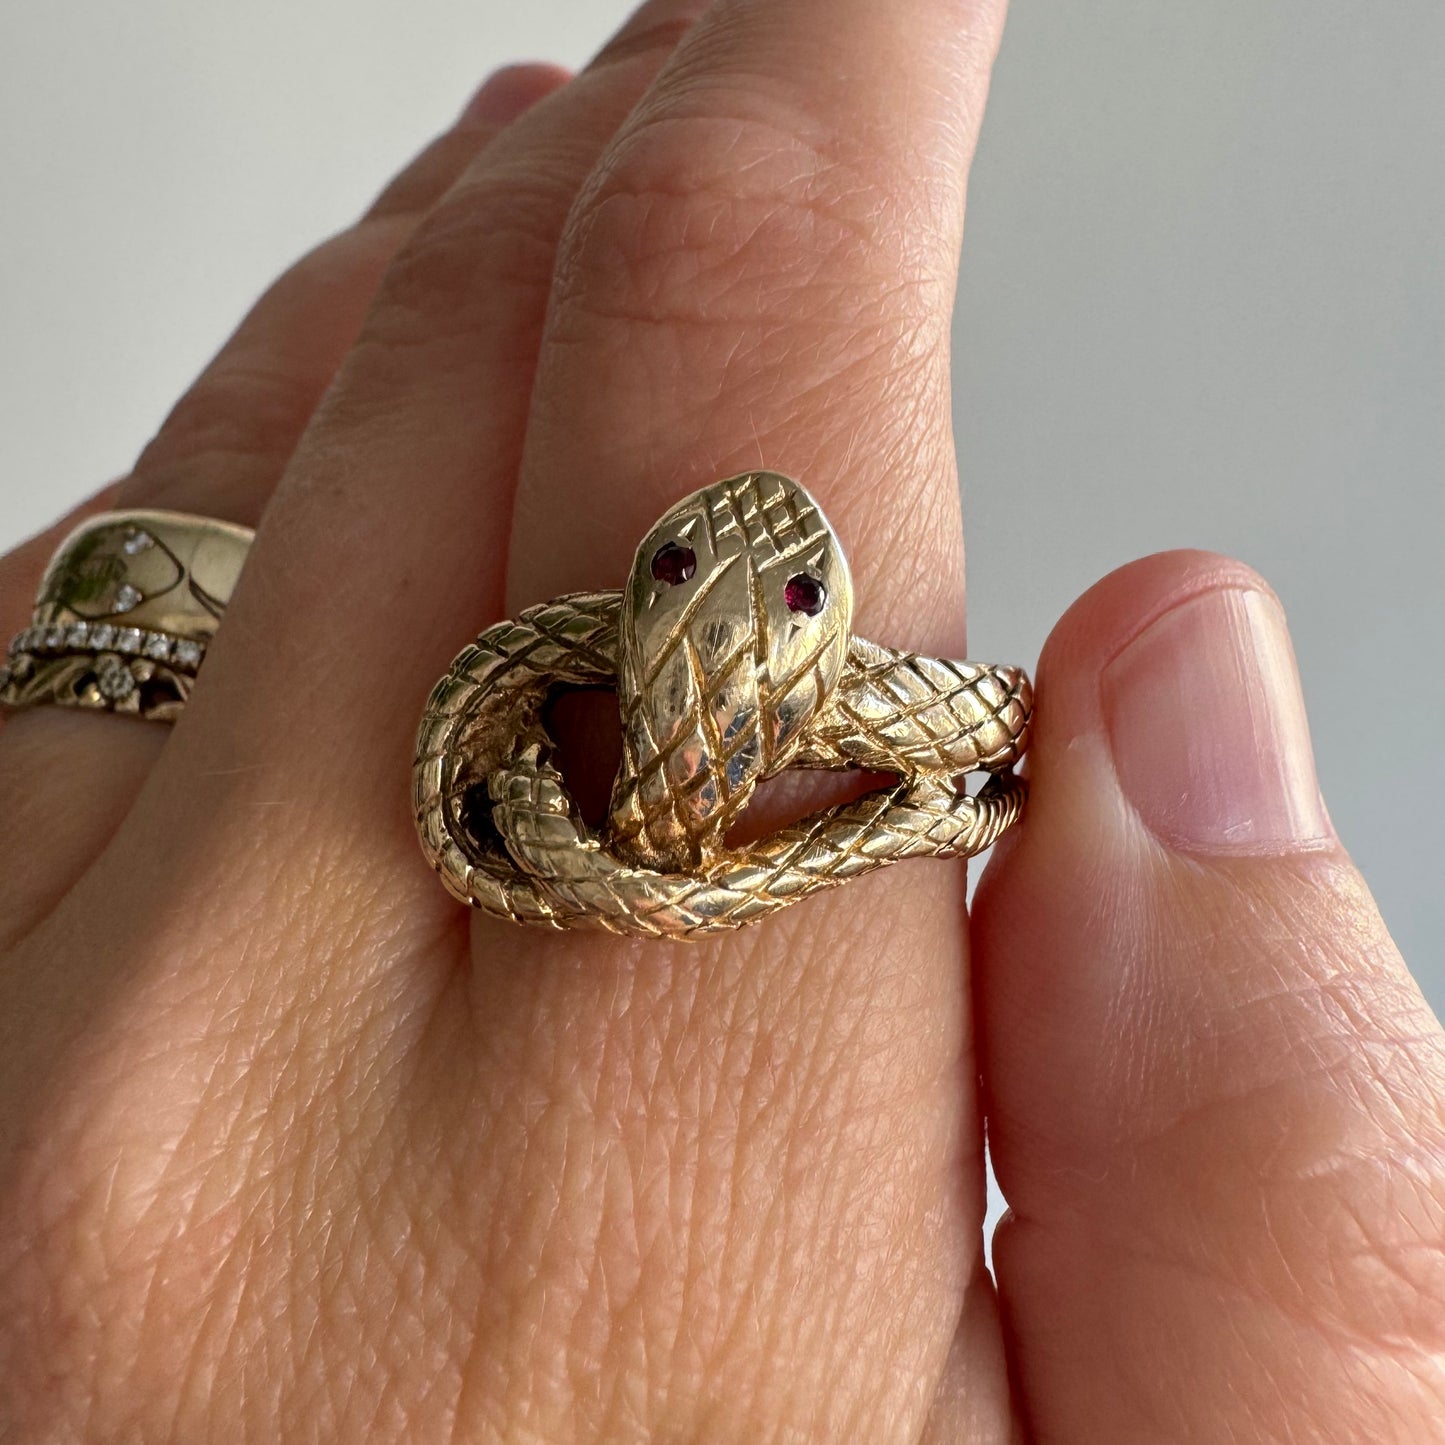 V I N T A G E // slithering knot / 10k yellow gold and garnet knotted snake band / size 10